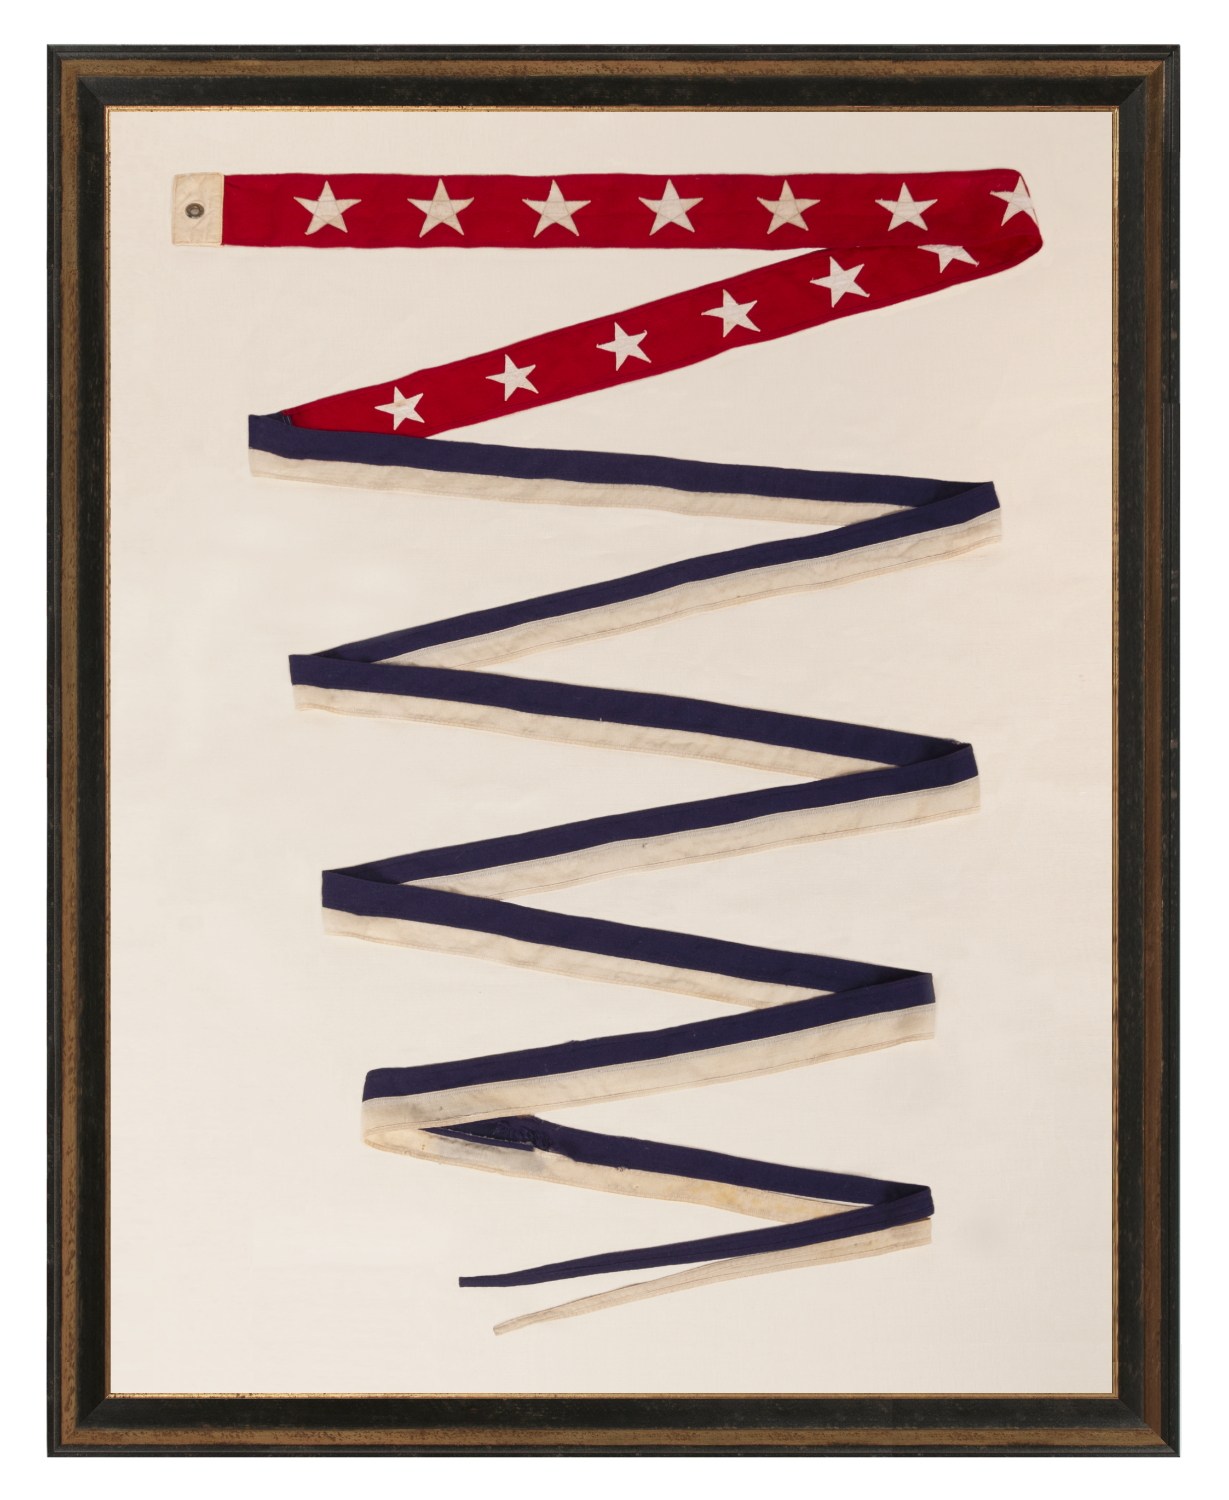 EXTREMELY RARE U.S. WAR DEPARTMENT COMMISSIONING PENNANT WITH 13 STARS, A REVERSAL OF THE U.S. NAVY COLOR SCHEME, 24 FEET ON THE FLY, SPANISH-AMERICAN WAR – WWI ERA (1898-1918) N THE FLY, SPANISH-AMERICAN WAR - WWI ERA (1898-1917)